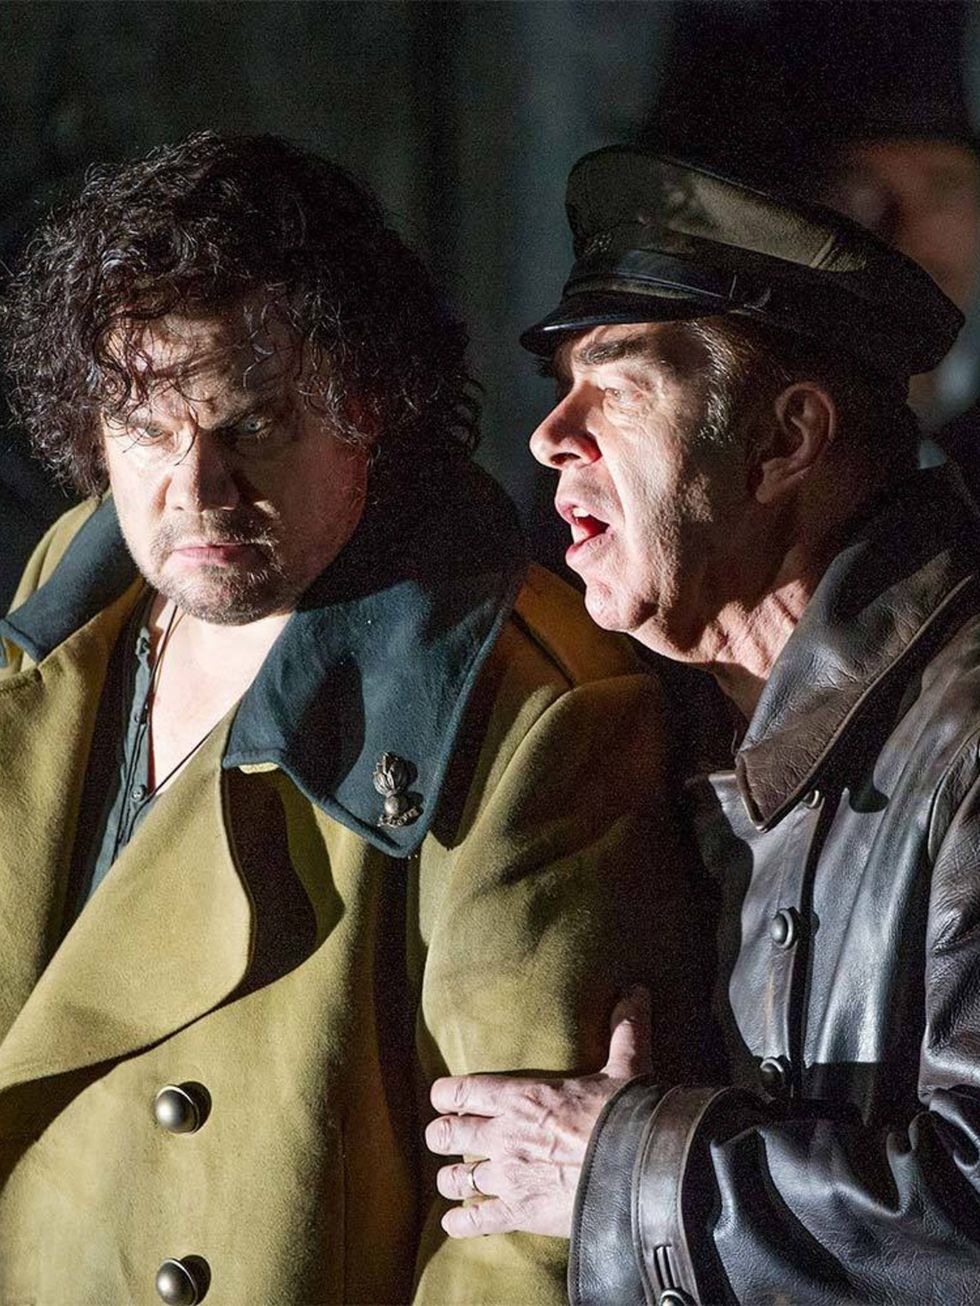 <p><strong>OPERA: Otello </strong></p>

<p>Betrayal, love and deception form the basis of Shakespeares great tragedy of Otello and Desdemona - which begins this weekend at the English National Opera.</p>

<p>Verdi brings the tale to life with a powerful 